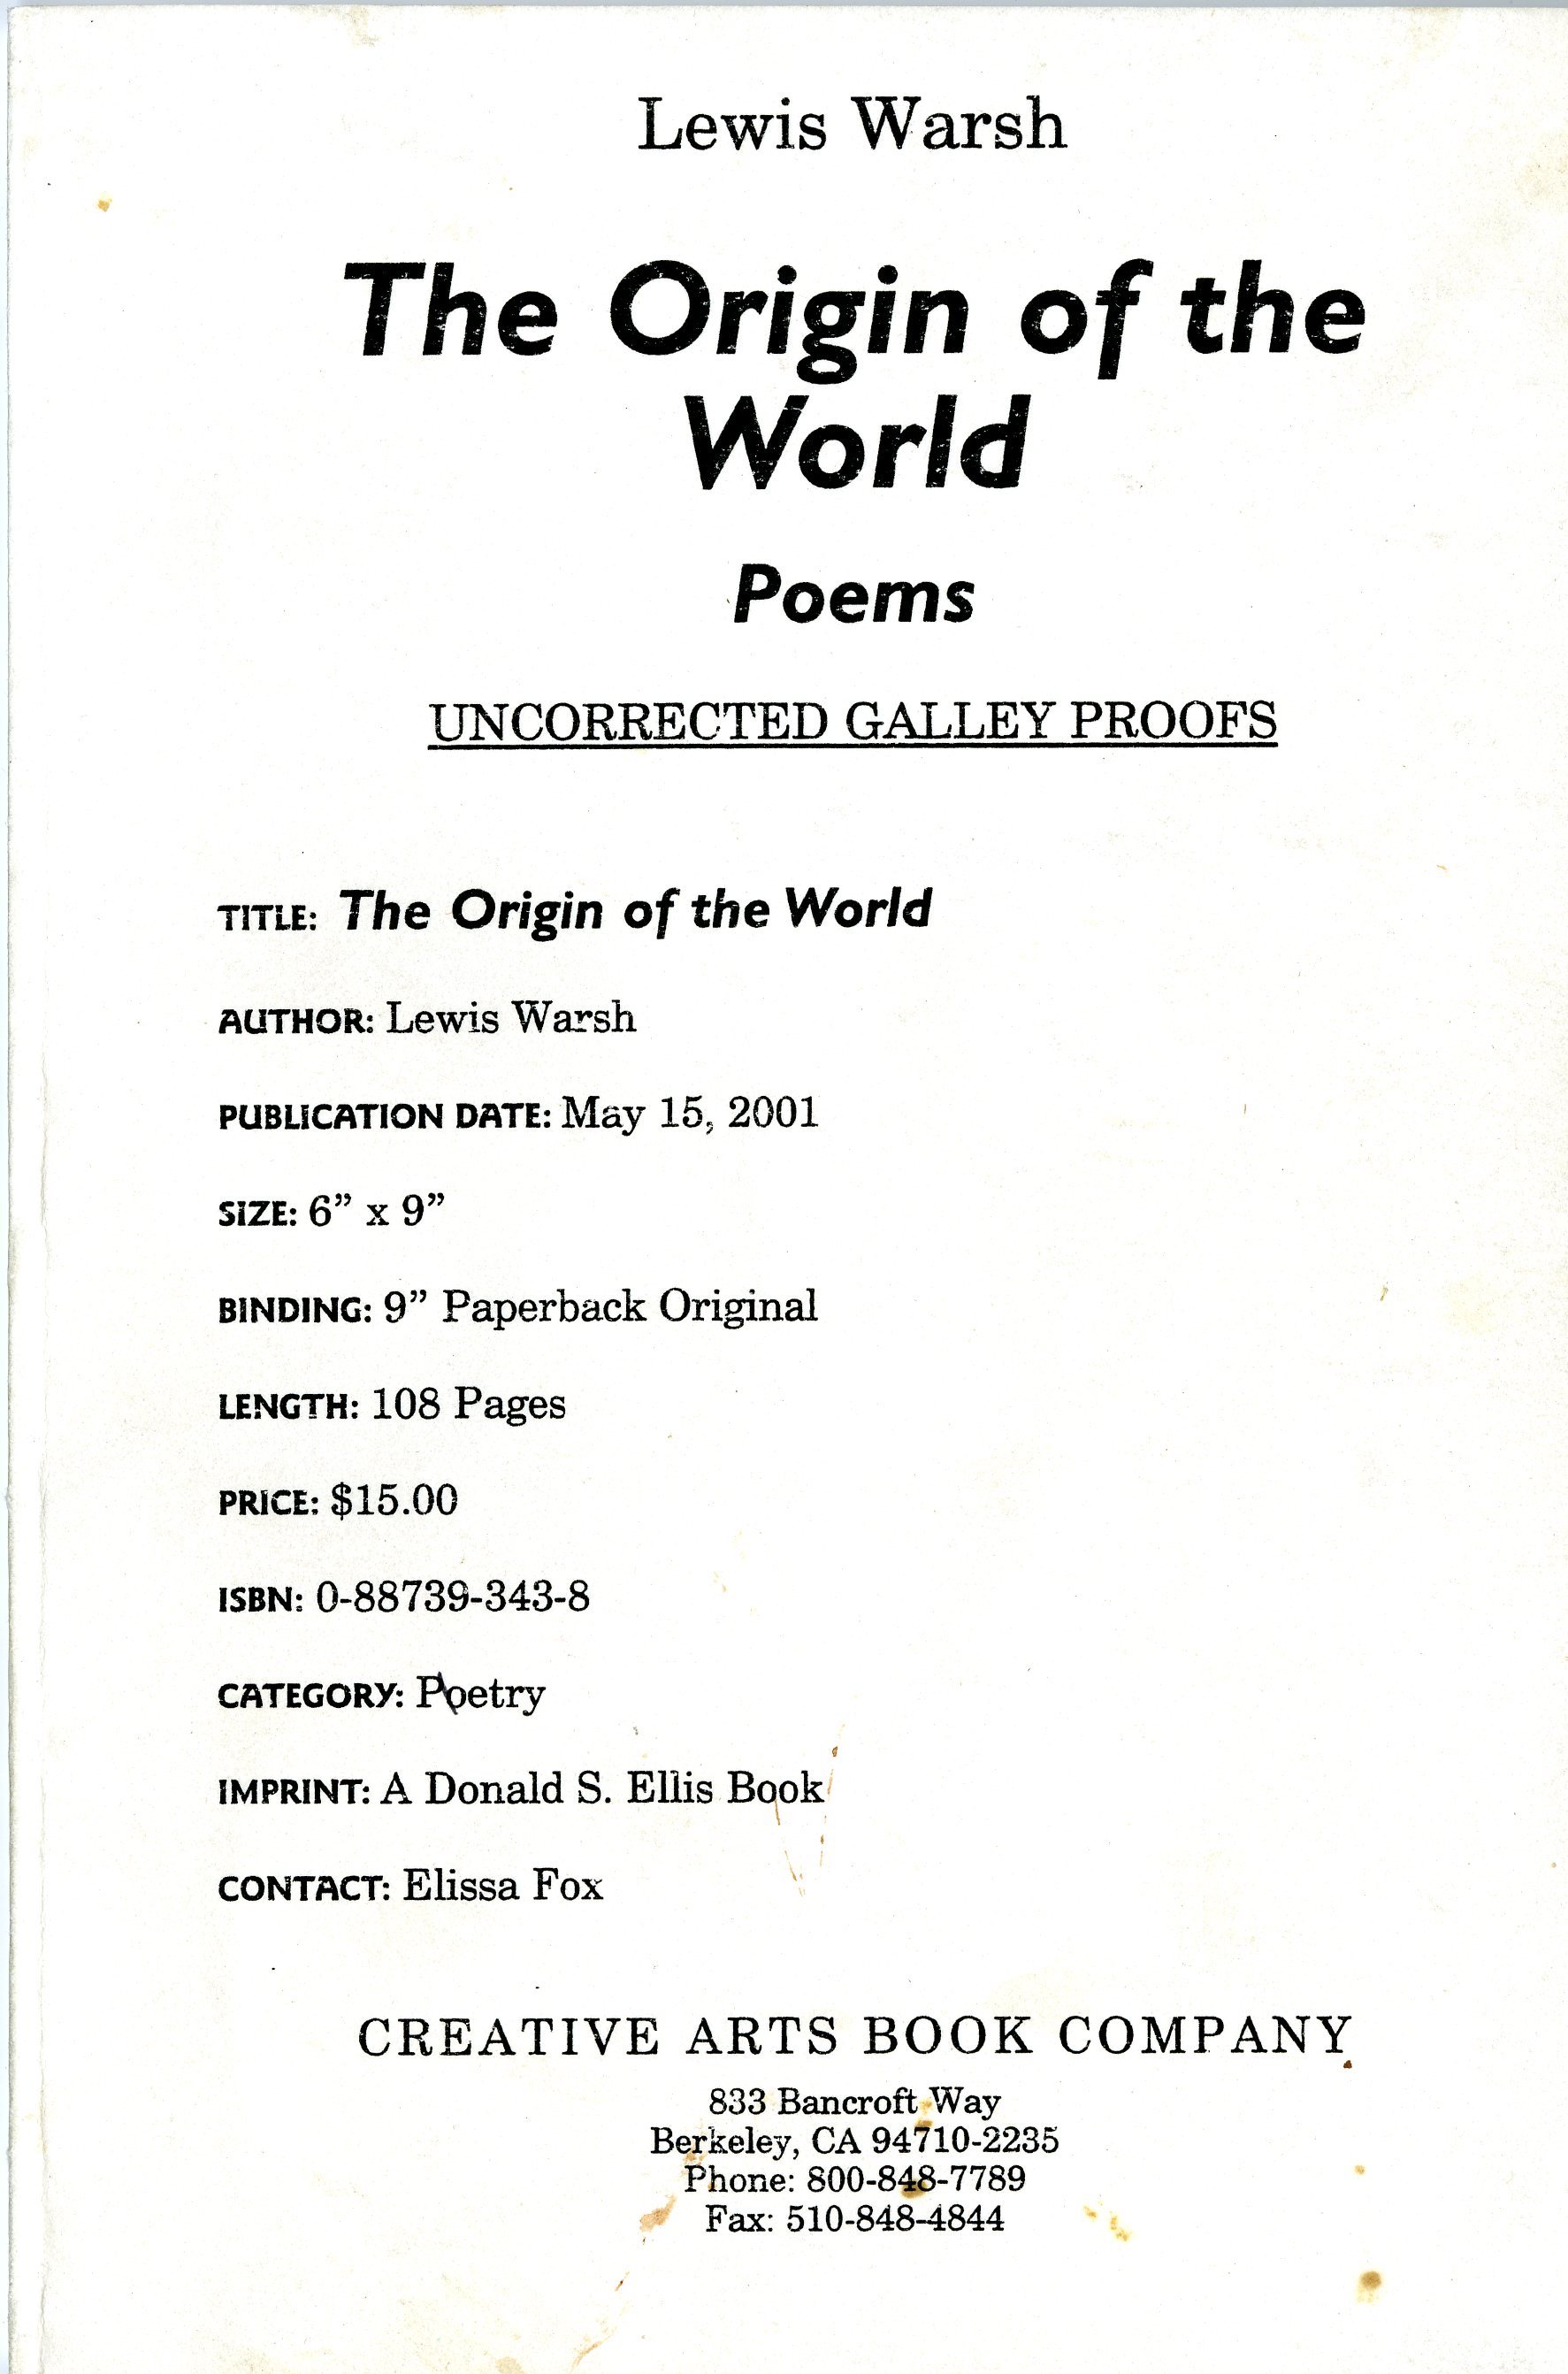 Warsh, Lewis. The Origin of the World. Uncorrected galley proofs. A Donald S. Ellis Book. Berkeley: Creative Arts Book Company, 2001